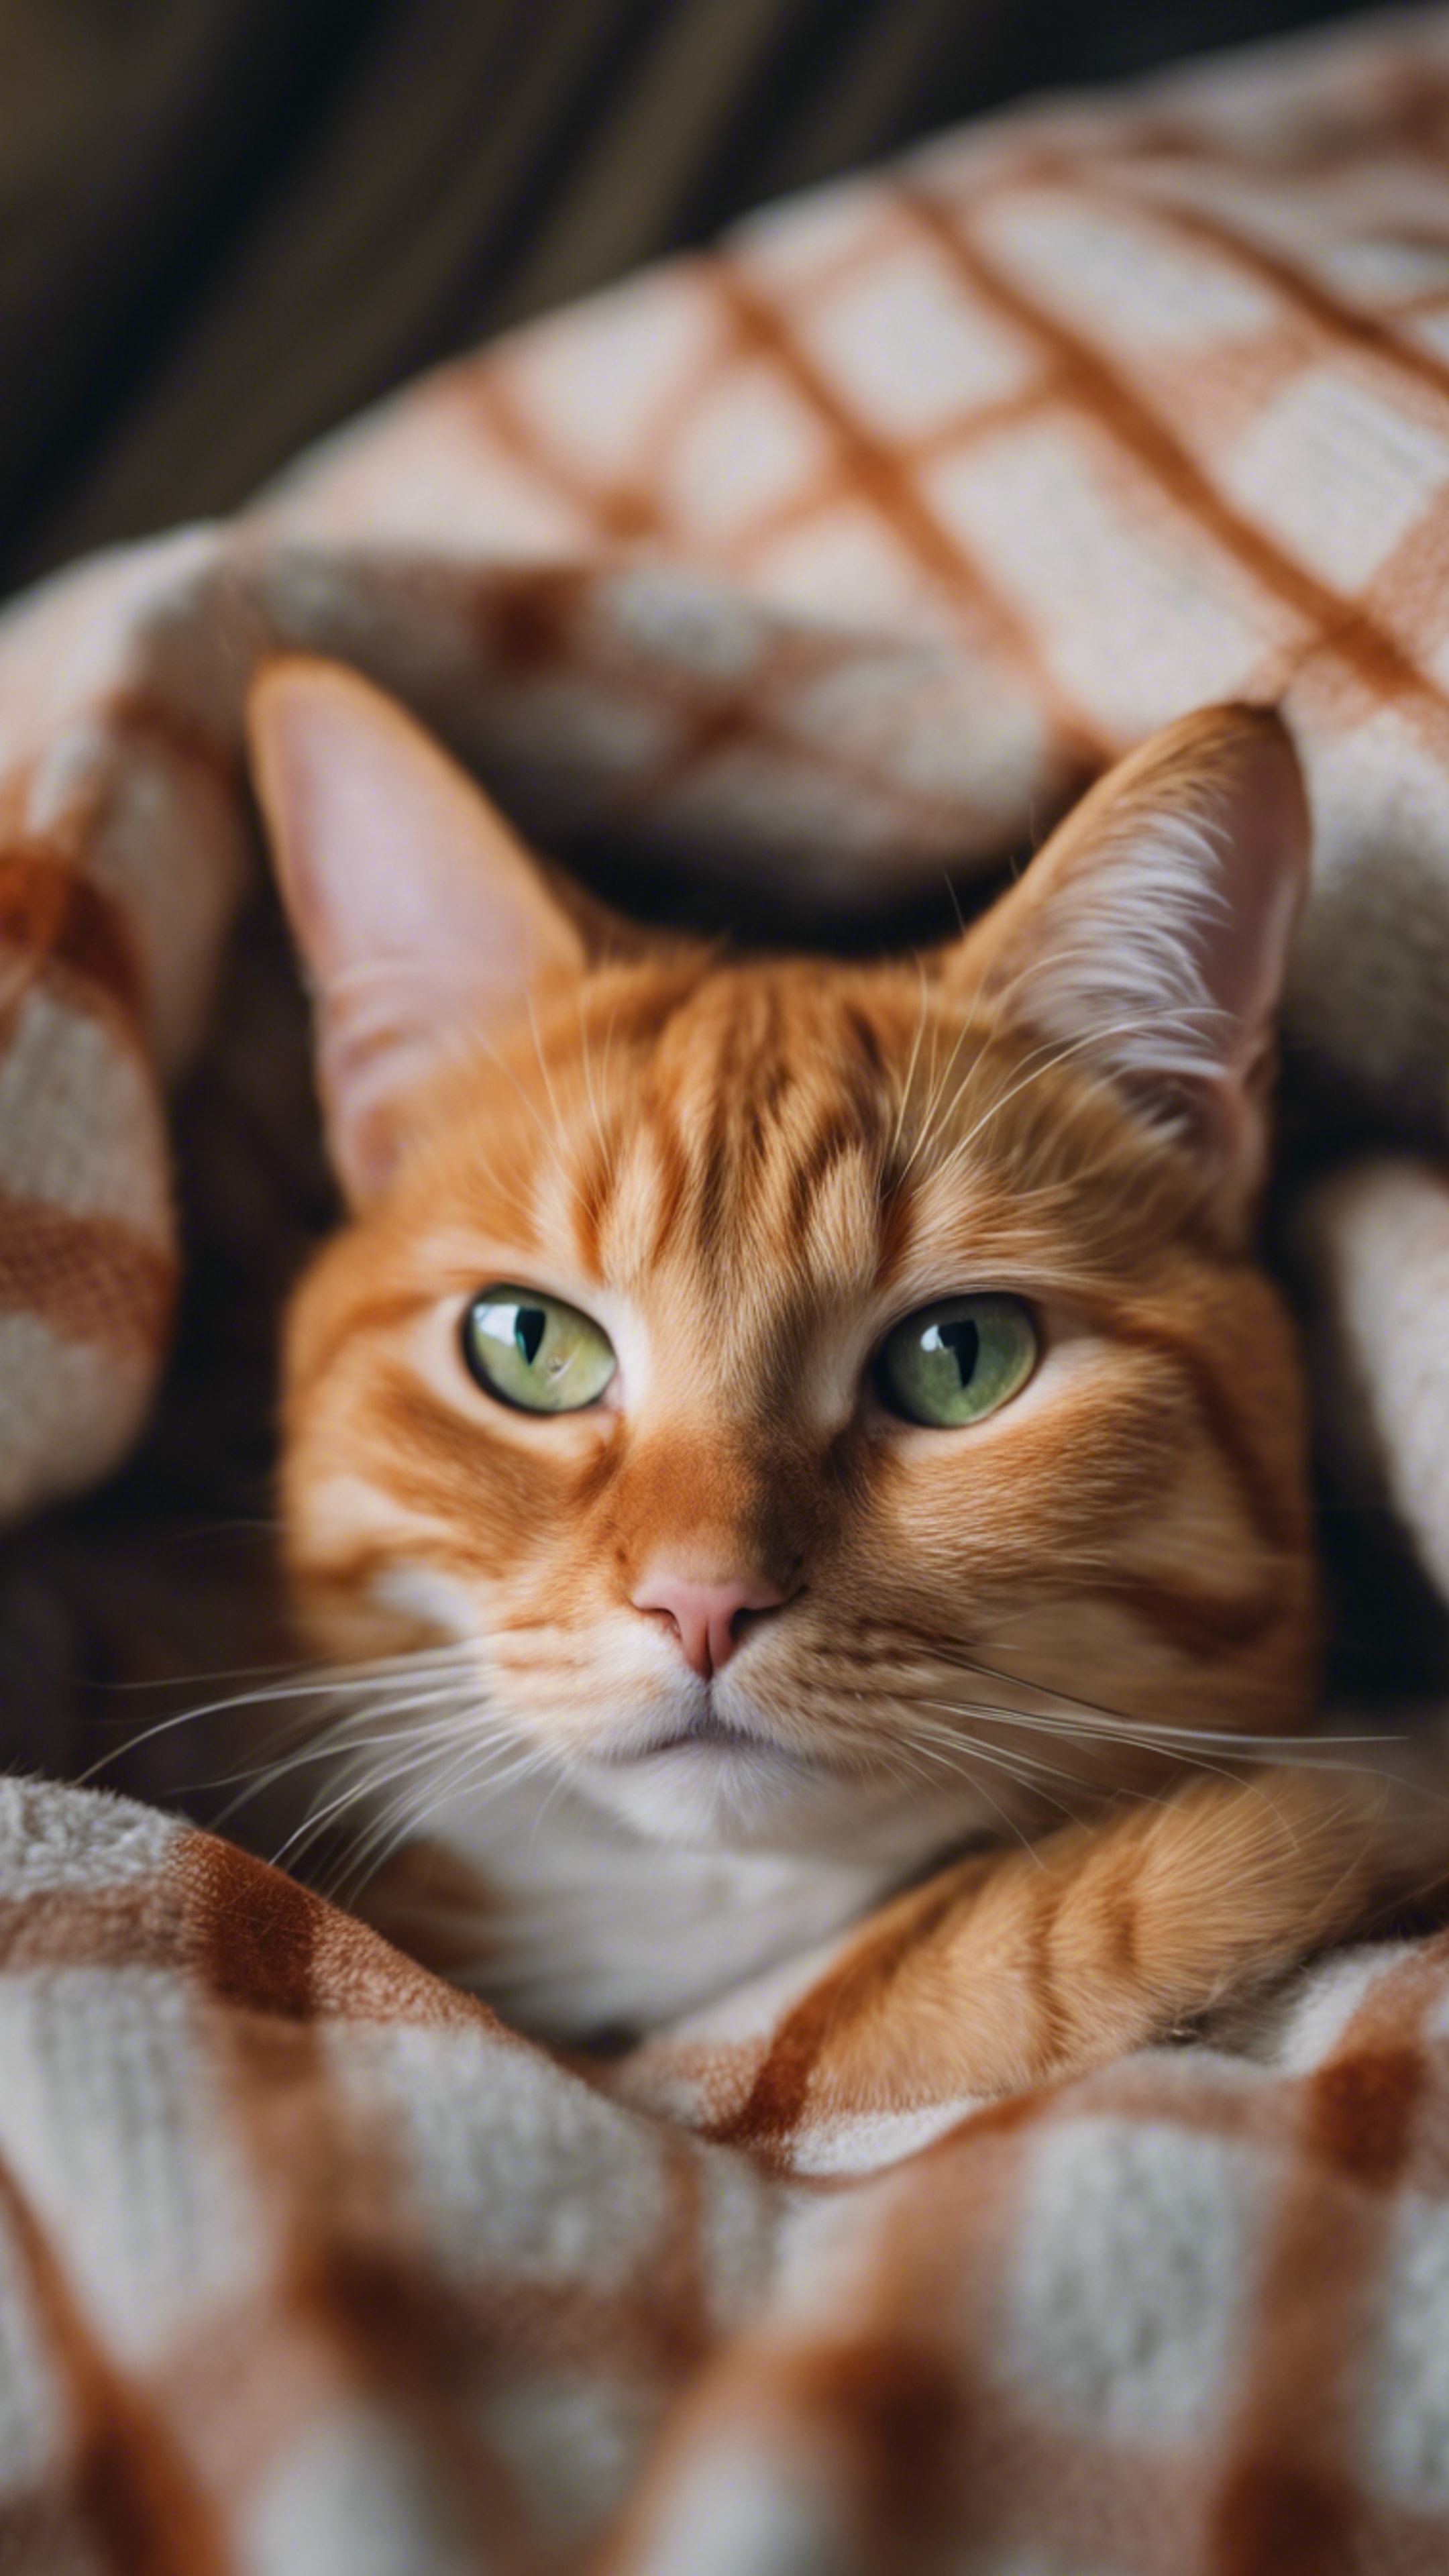 A close up of an orange tabby cat curled up on a cozy plaid blanket, purring gently, with a playful glint in its eyes. Fondo de pantalla[45e4538616504ff6a891]